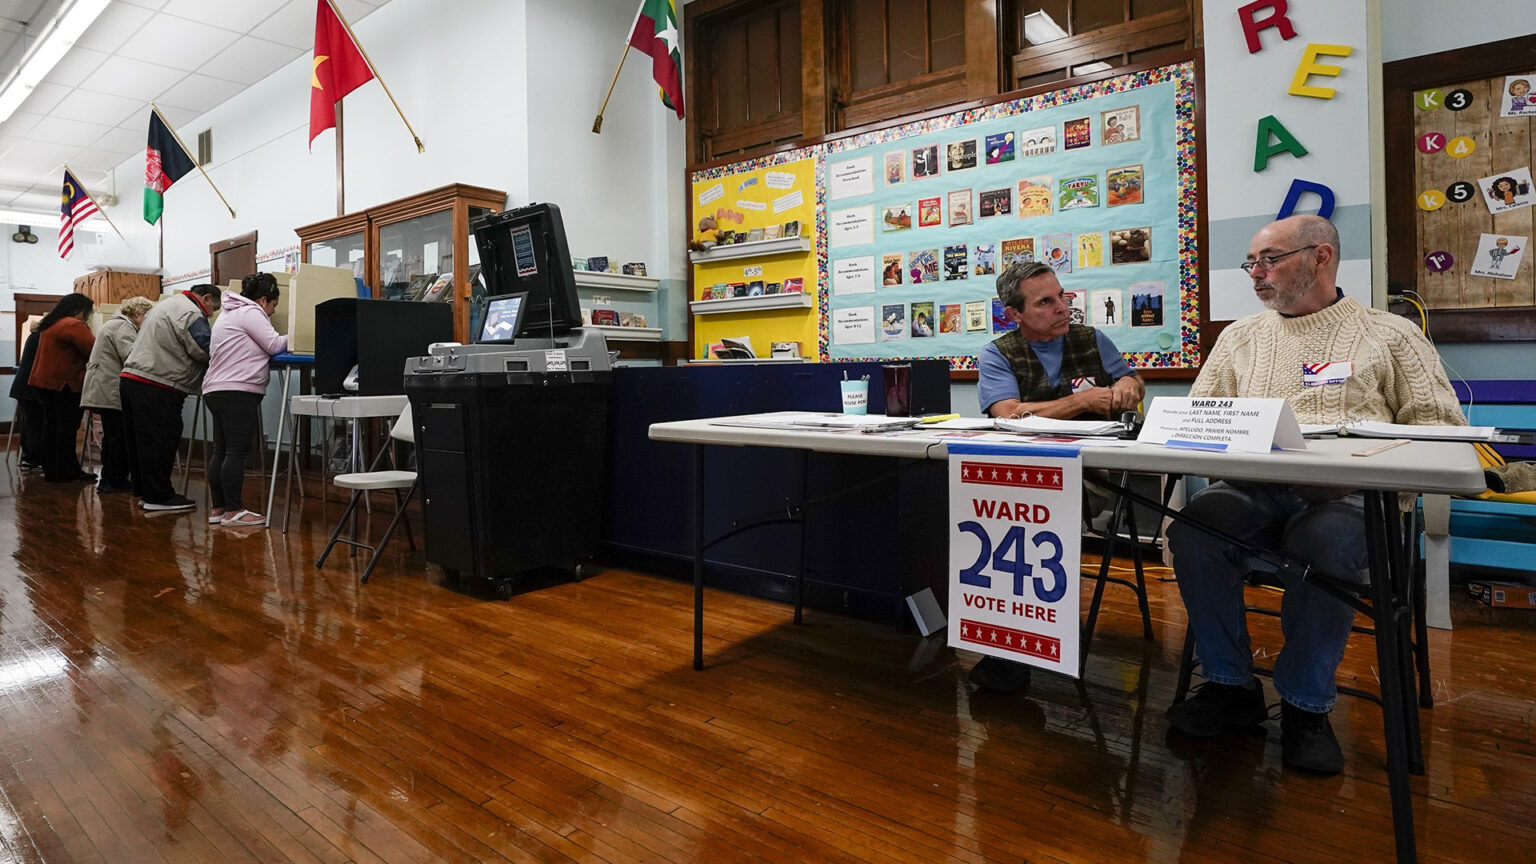 Two people sit at a folding table with a sign reading Ward 243 and Vote Here affixed to its front, with other people standing and filling out ballots in privacy booths next to ballot tabulator machine in a room with polished hardwood floors, glass-doored cabinets, flags of different nations mounted on its walls, and bulletin boards showing a variety of graphics.